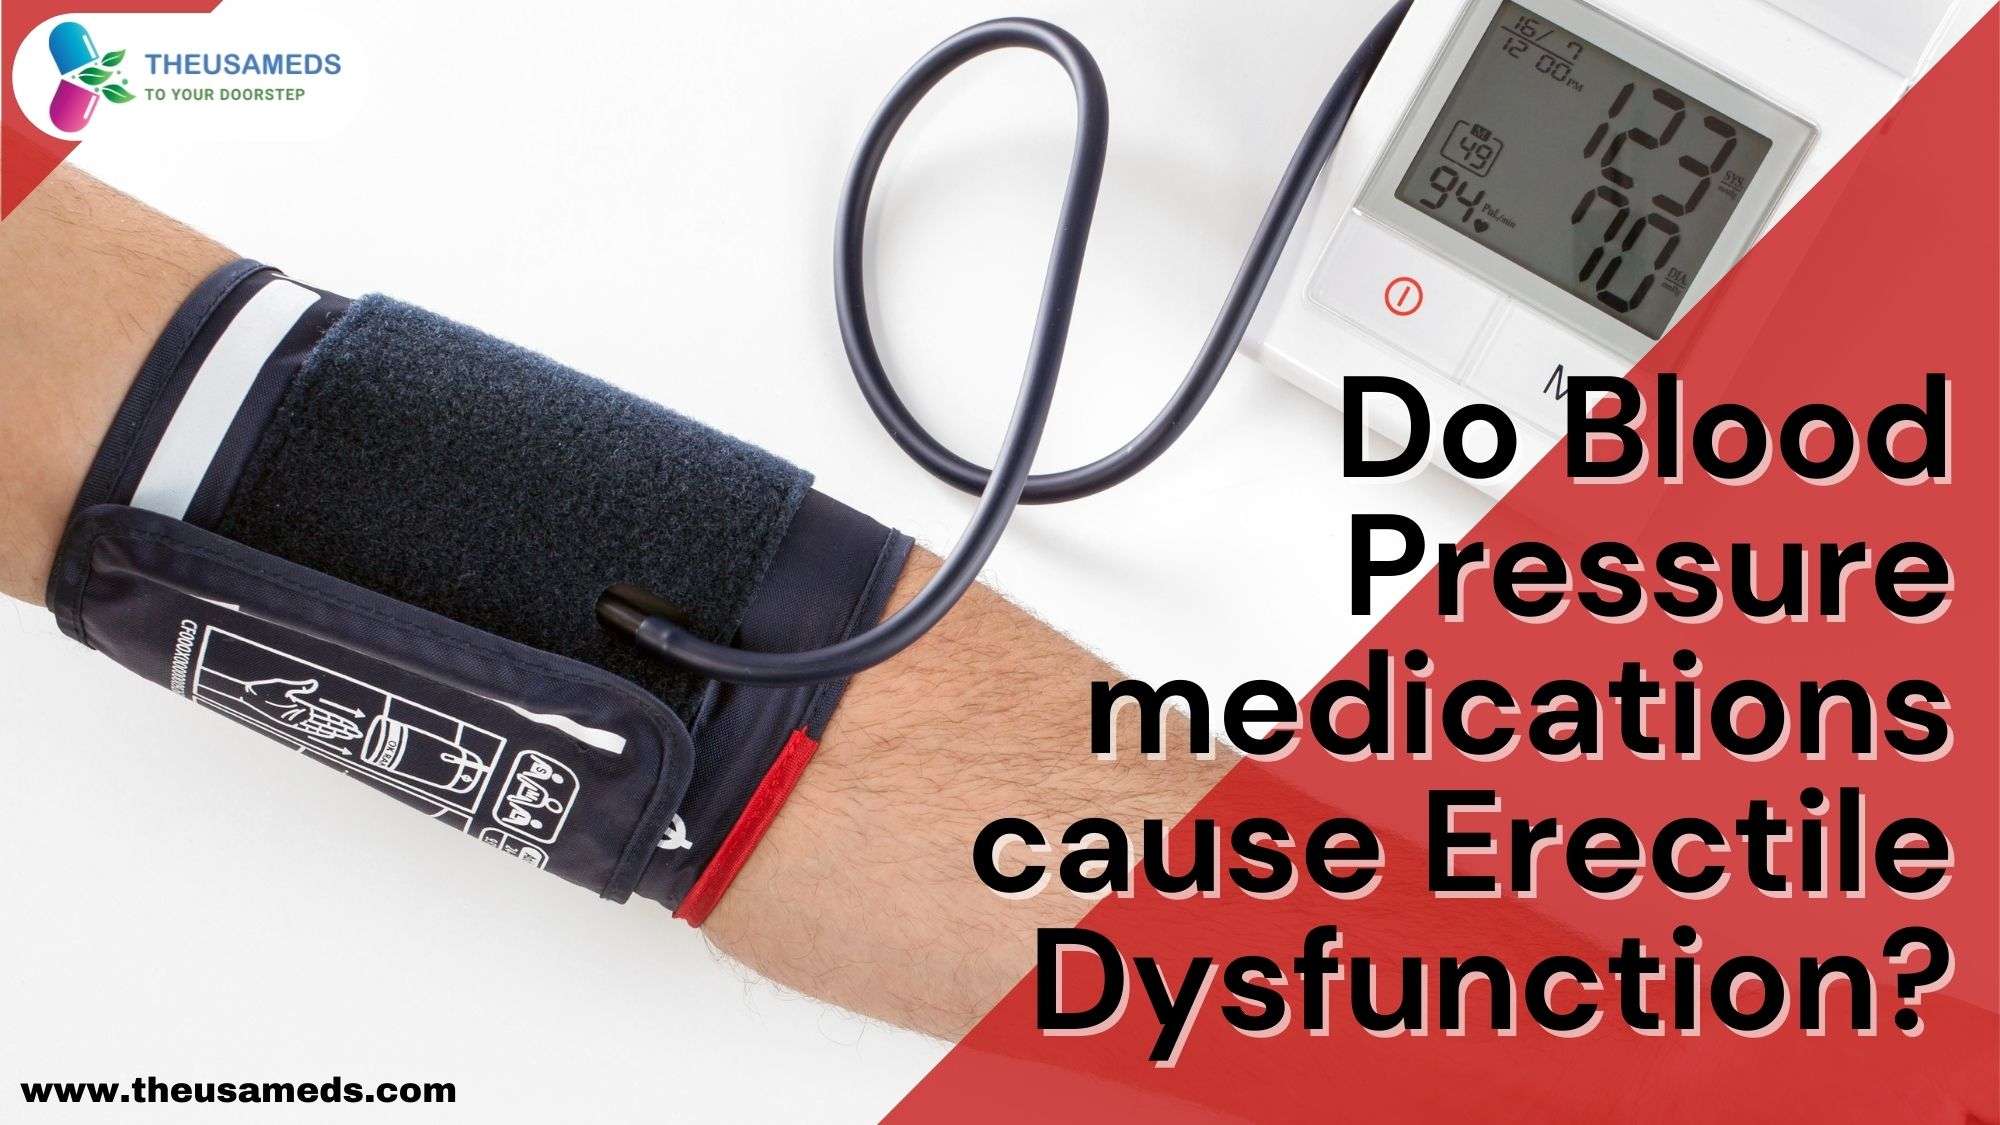 Blood Pressure medications and Erectile Dysfunction